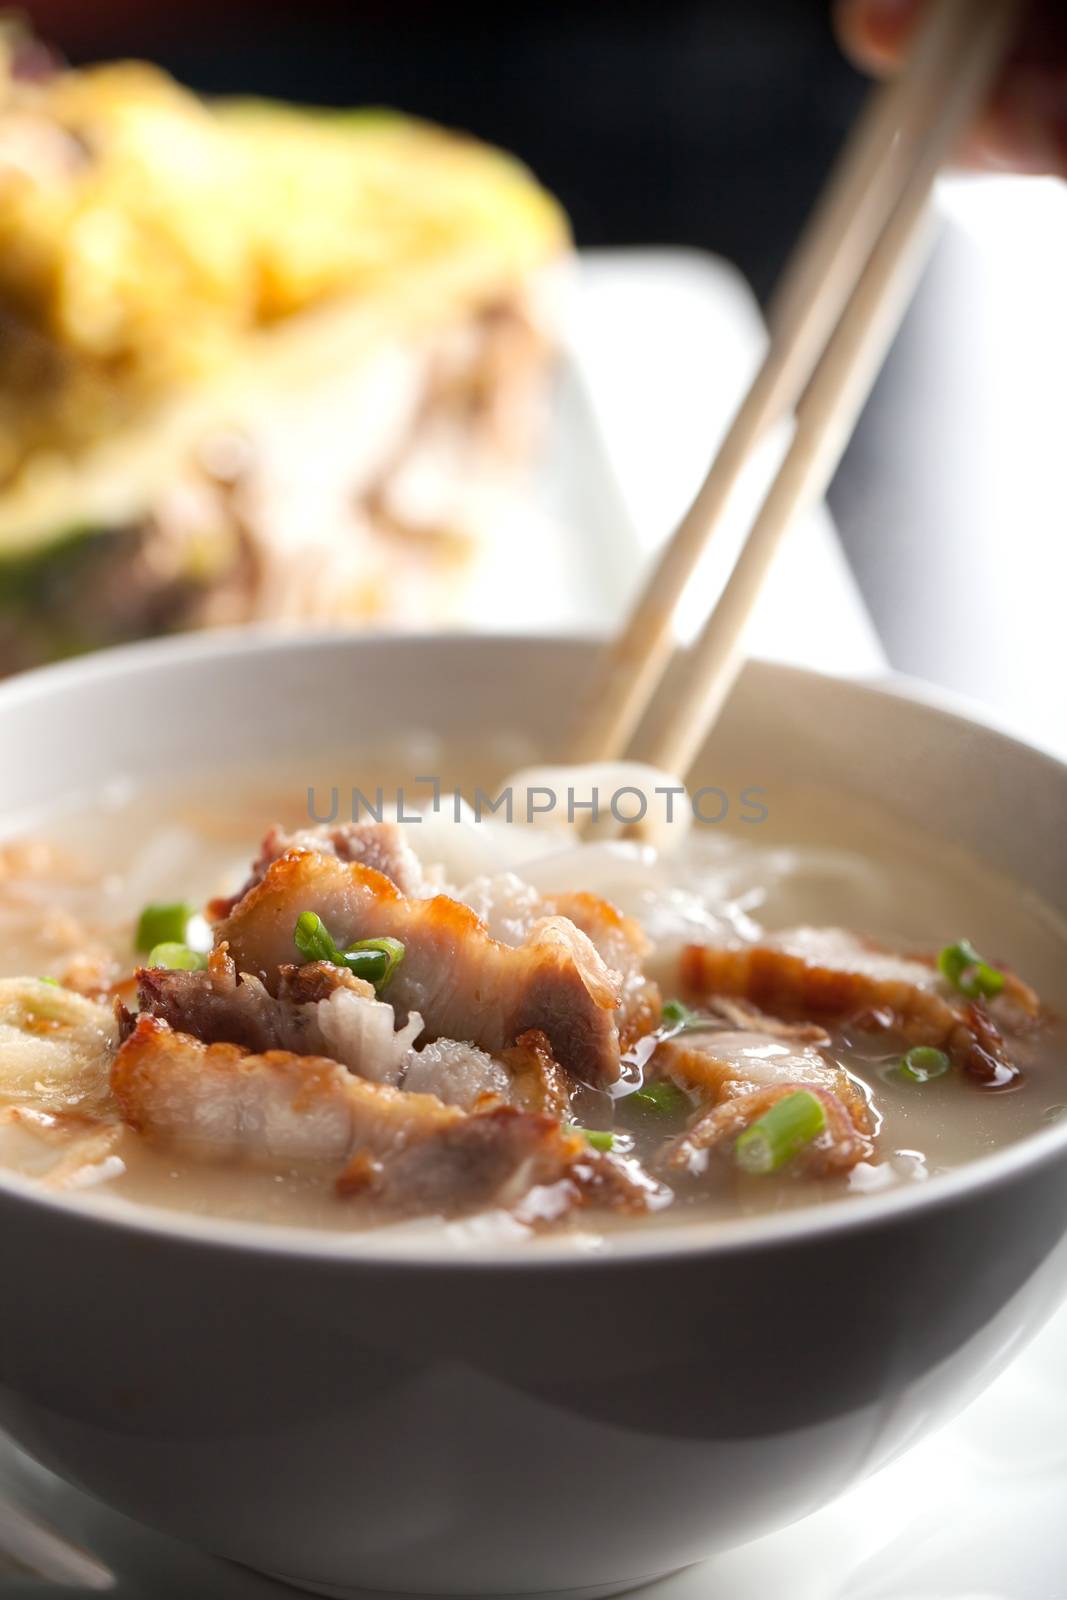 Closeup of a person eating Thai style crispy pork rice noodle soup from a bowl with chopsticks. Pineapple fried rice in the background.